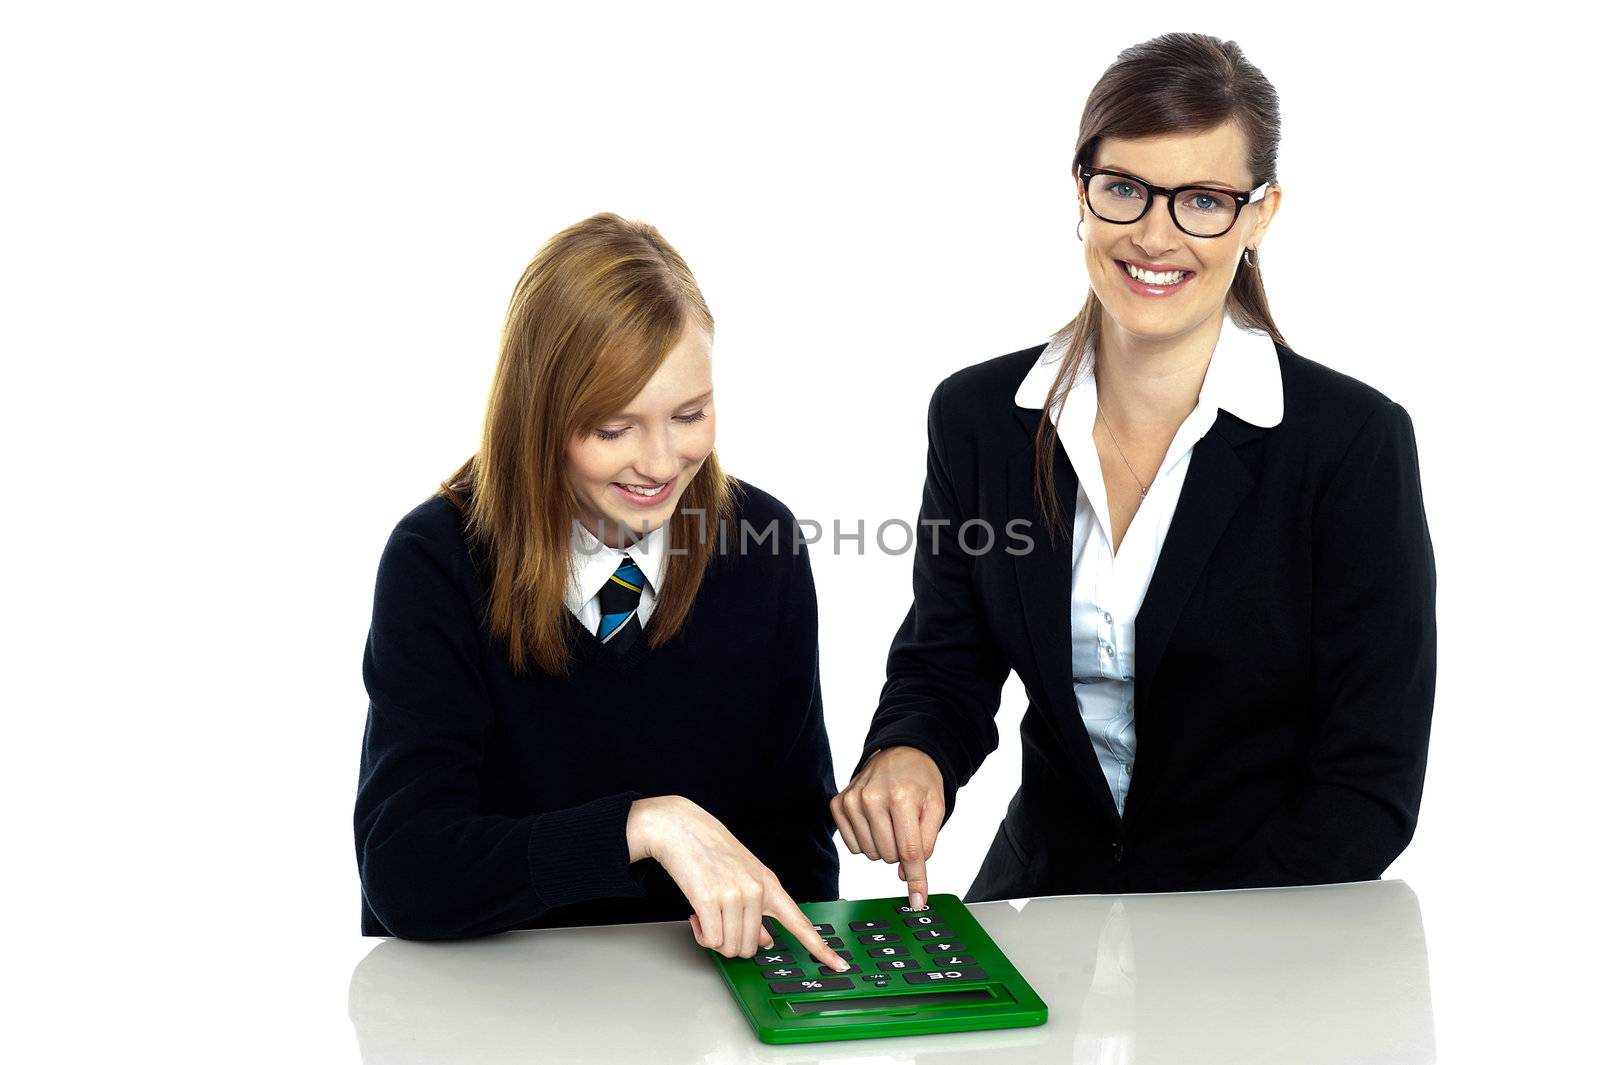 Pretty teacher and student working on a large green calculator together.